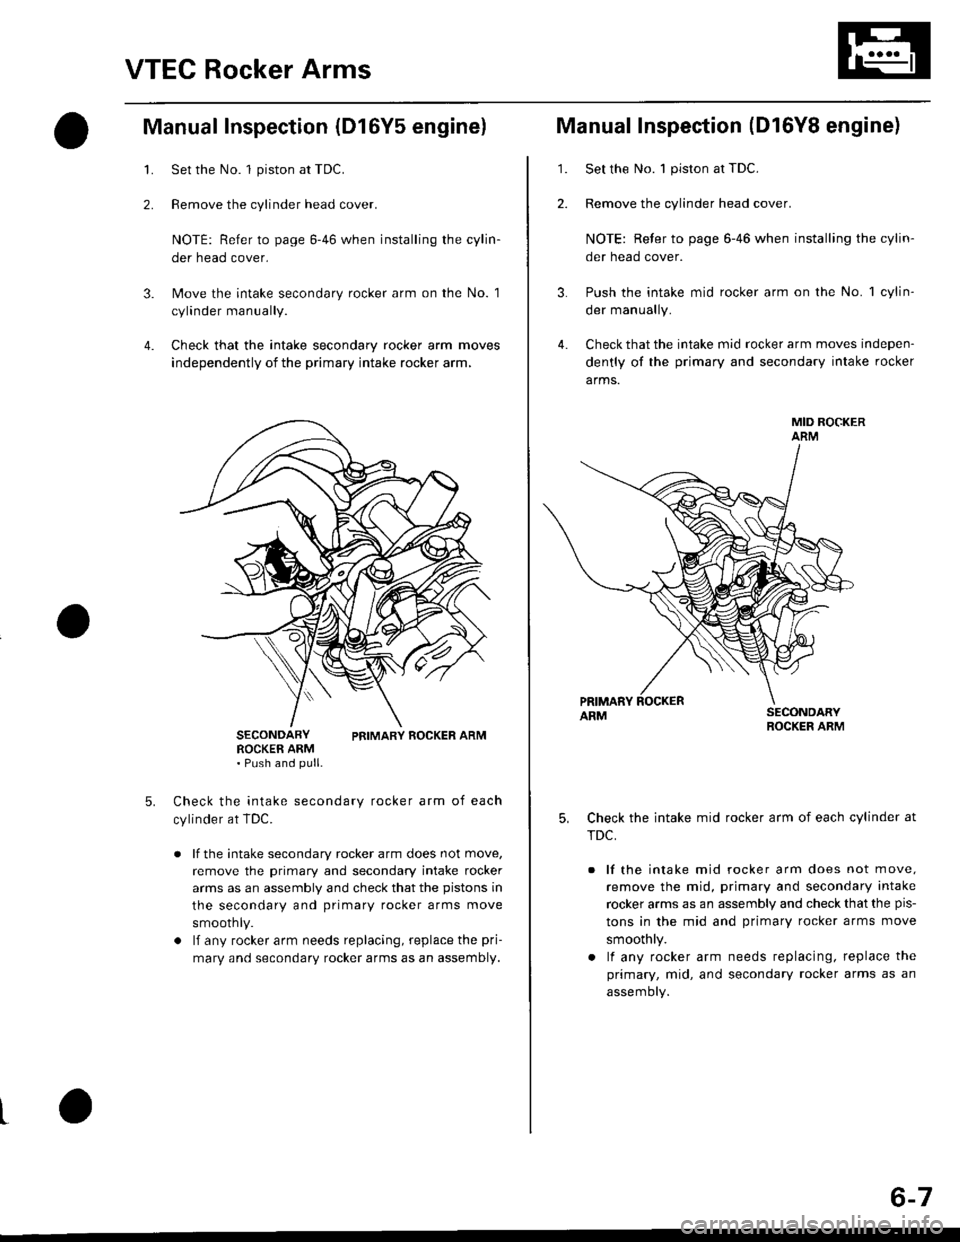 HONDA CIVIC 1996 6.G Workshop Manual VTEC Rocker Arms
2.
Manual Inspection (D16Y5 engine)
3.
1.
4.
Set the No. 1 piston at TDC.
Remove the cylinder head cover.
NOTE: Refer to page 6-46 when installing the cylin-
der head cover.
Move the 